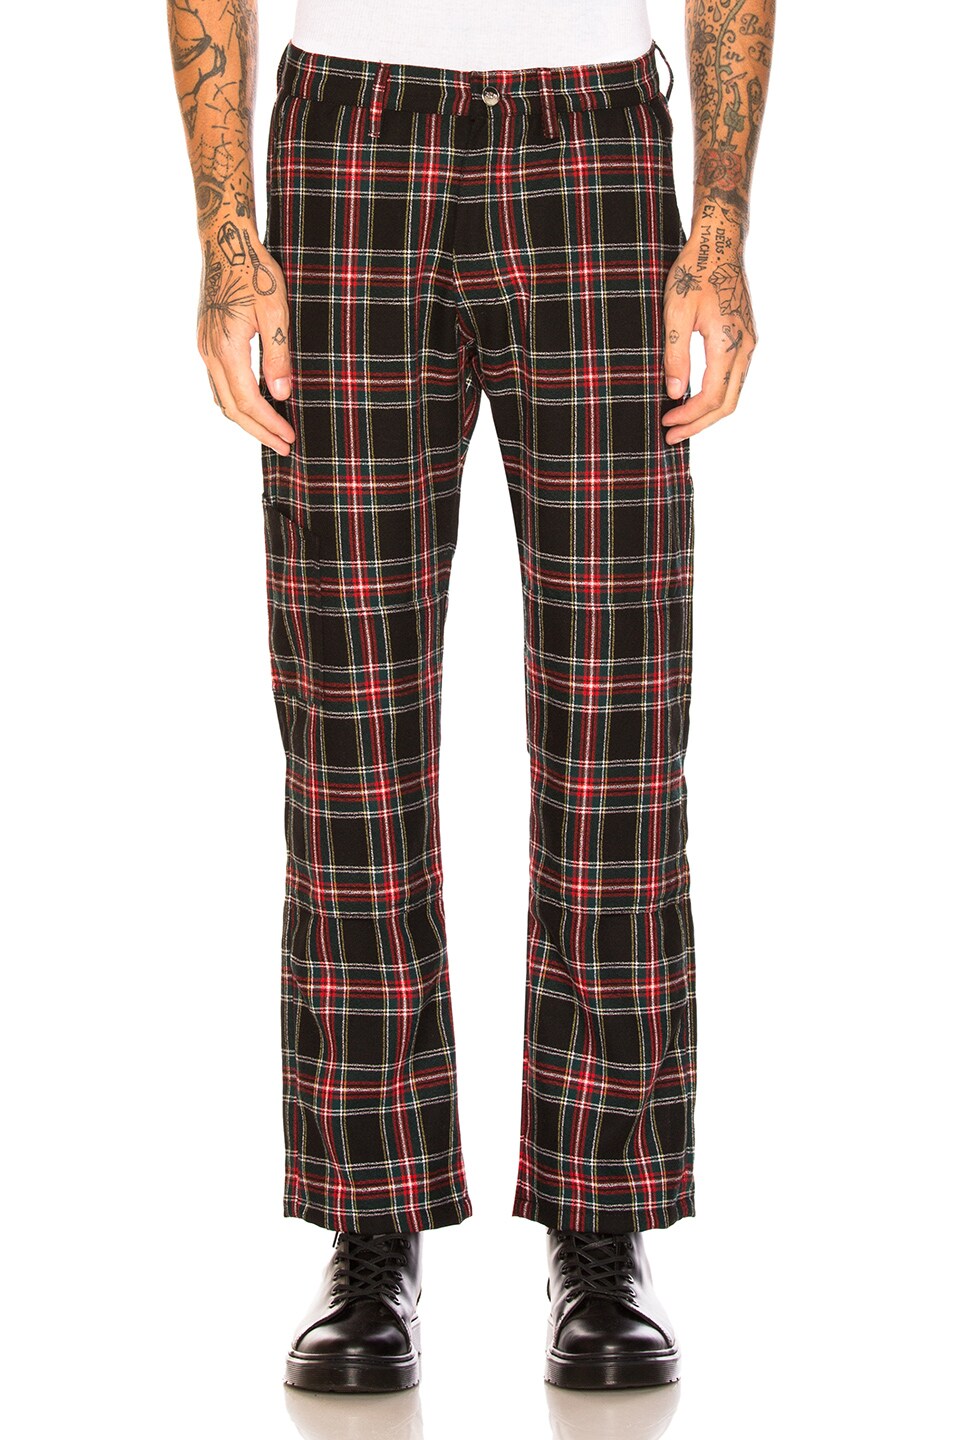 Image 1 of Enfants Riches Deprimes Wool Utility Trousers in Christmas Plaid